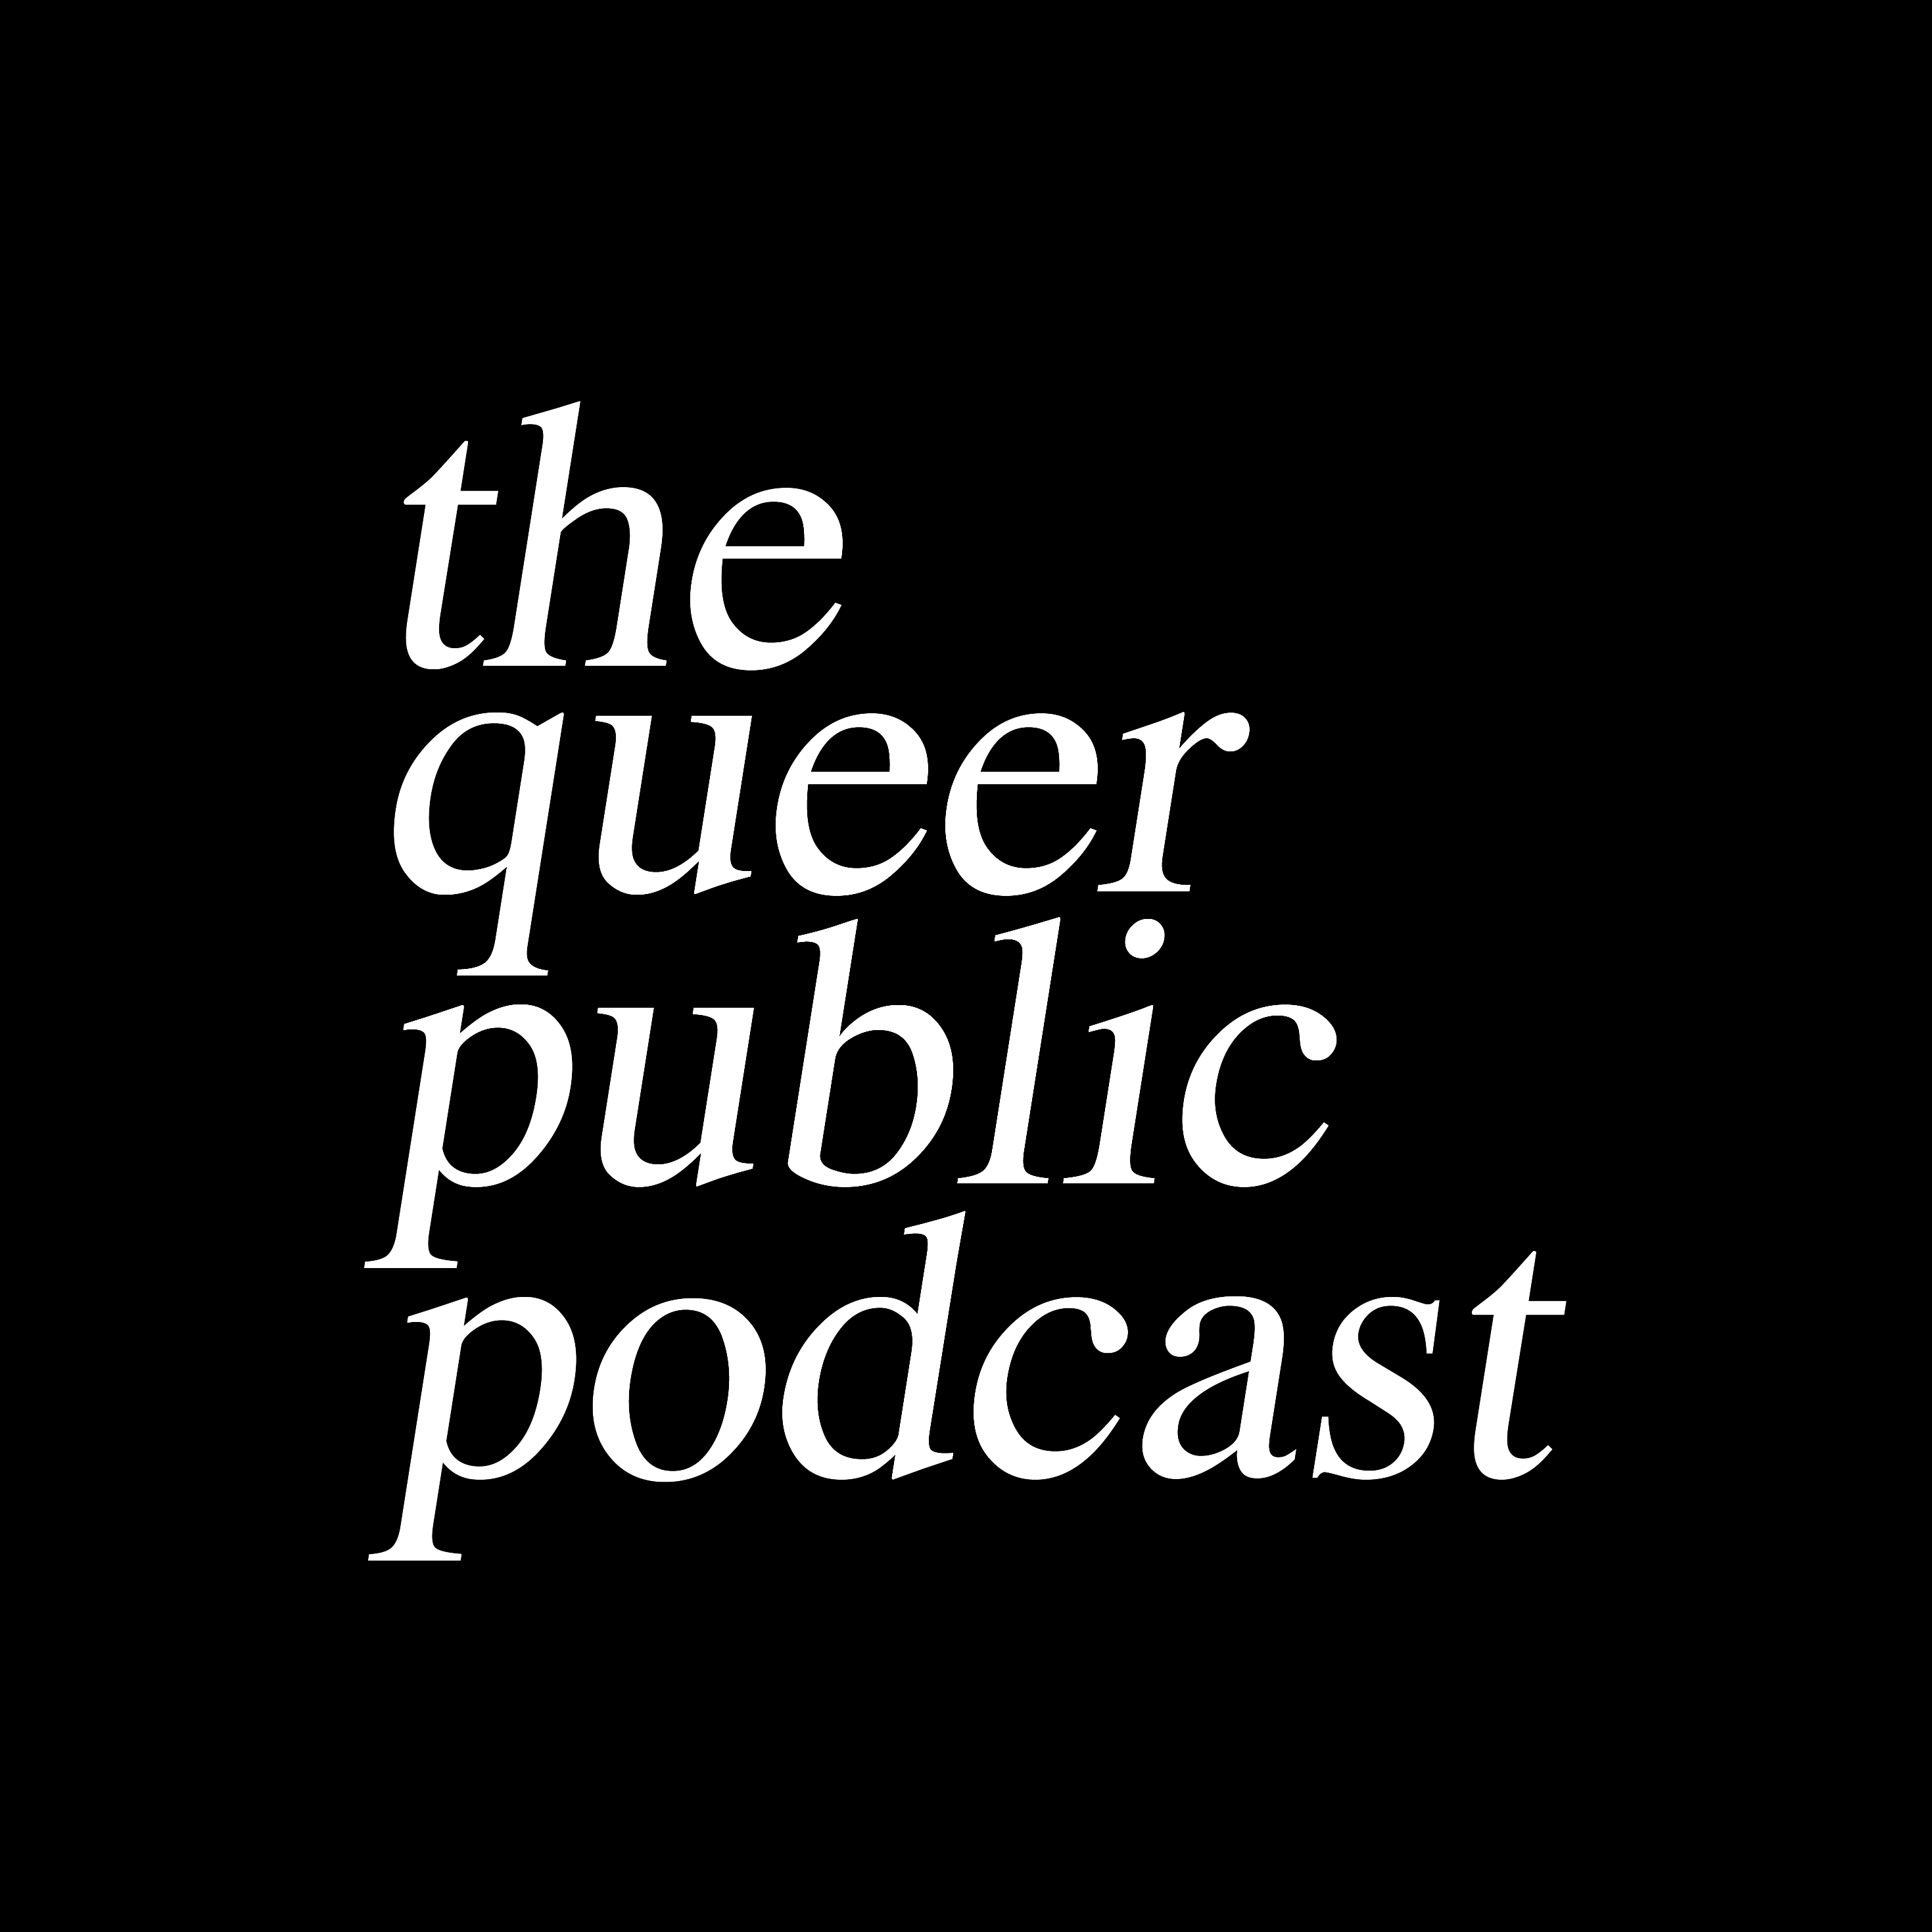 Queer Public is a podcast about real-life queer life. Listen to the full season anywhere you listen to podcasts https://t.co/tGWqFclMQF